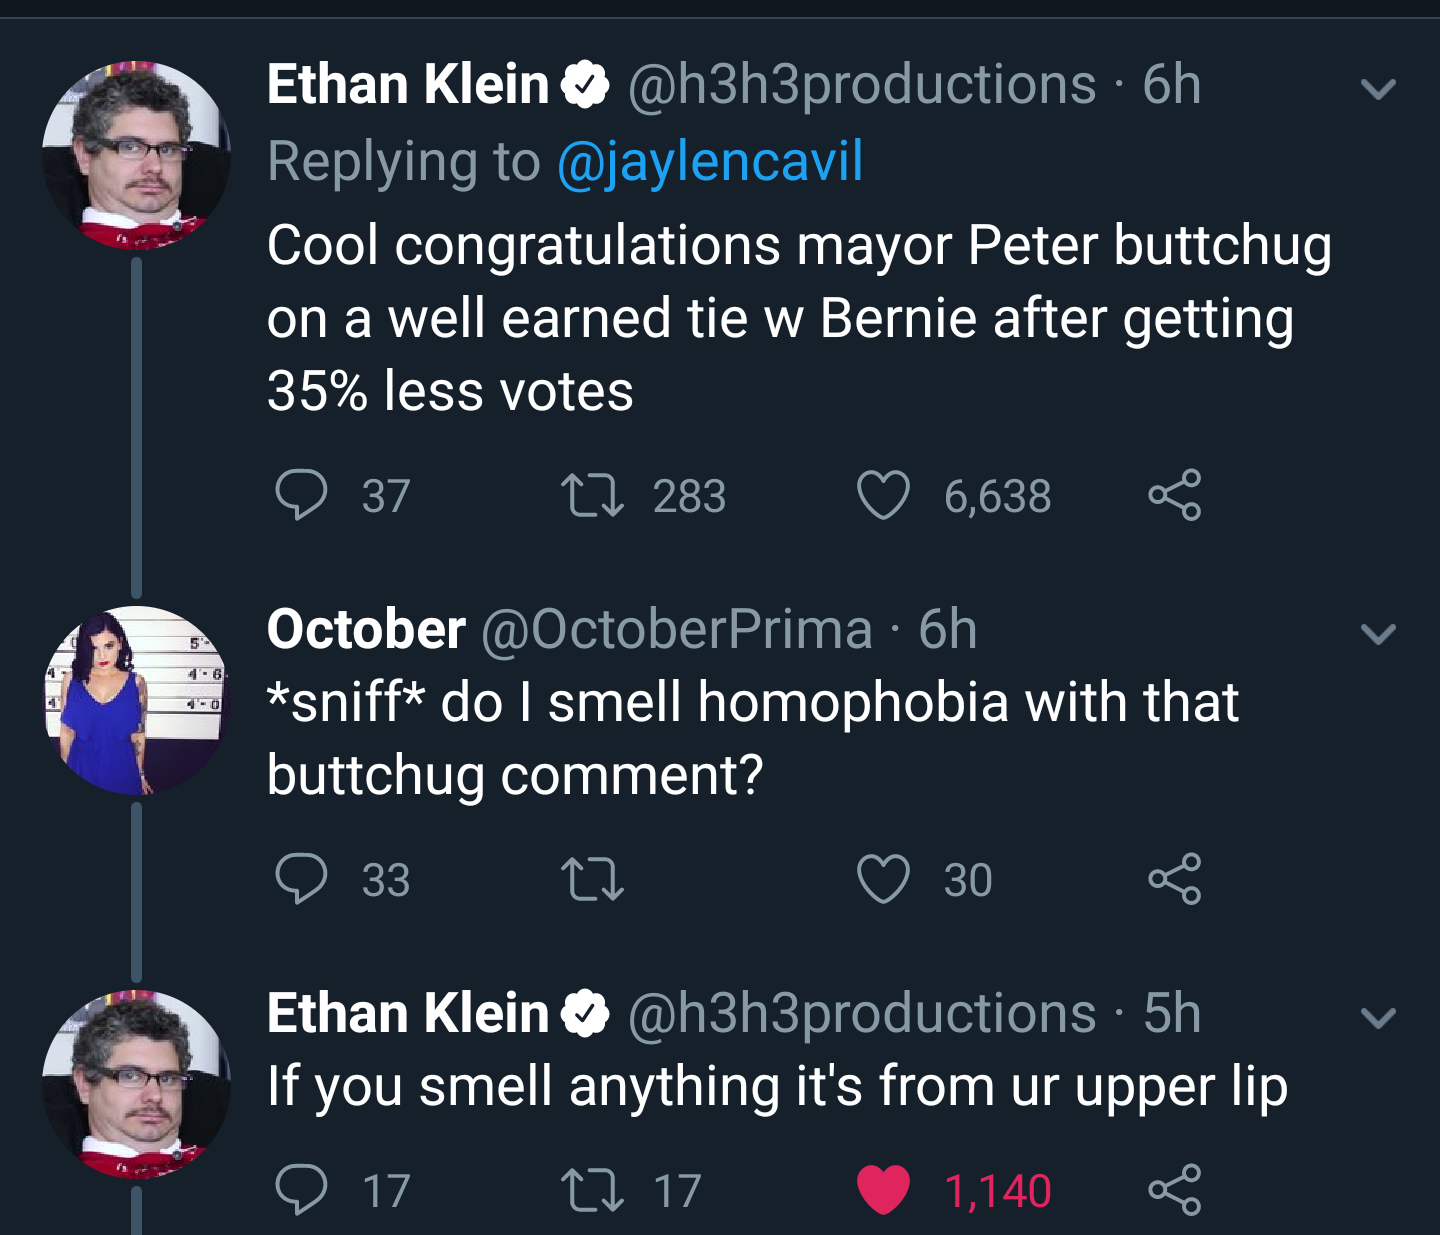 presentation - Ethan Klein 6h v Cool congratulations mayor Peter buttchug on a well earned tie w Bernie after getting 35% less votes 237 22 283 6,638 4 .6 0 October Prima 6h sniff do I smell homophobia with that buttchug comment? 0 33 22 30 g v Ethan Klei